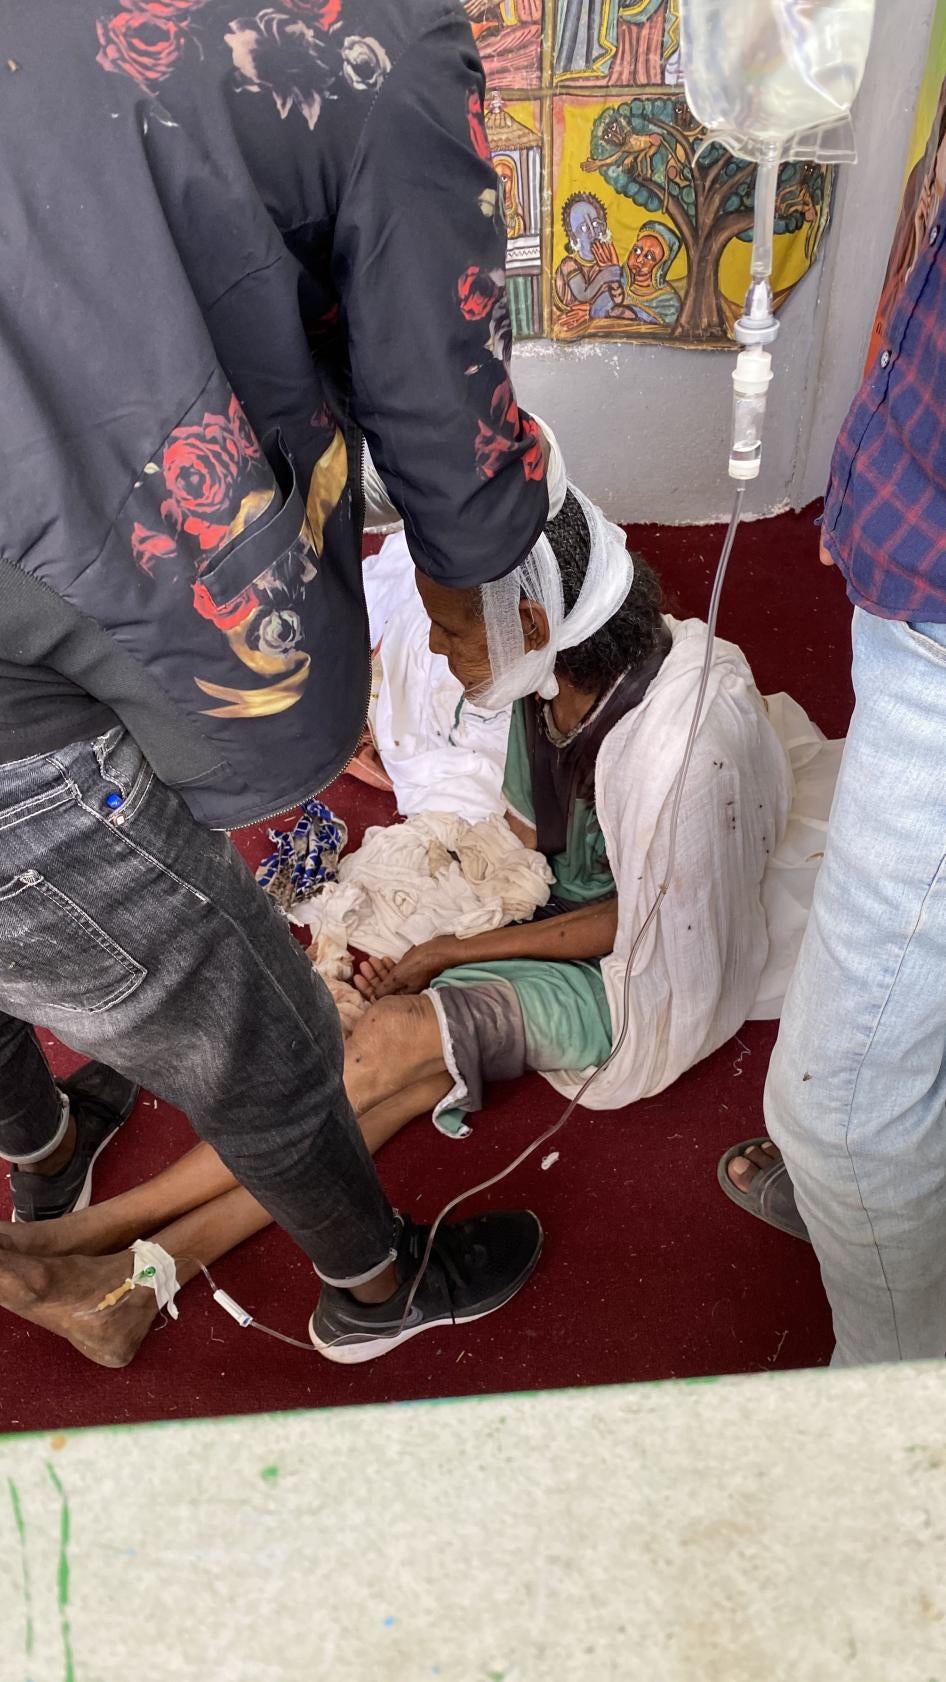 A woman, injured by shelling during the Ethiopian and Eritrean military in Axum, sits on the floor as she receives medical care. The image was taken on November 30, 2020 according to the photograph’s metadata.